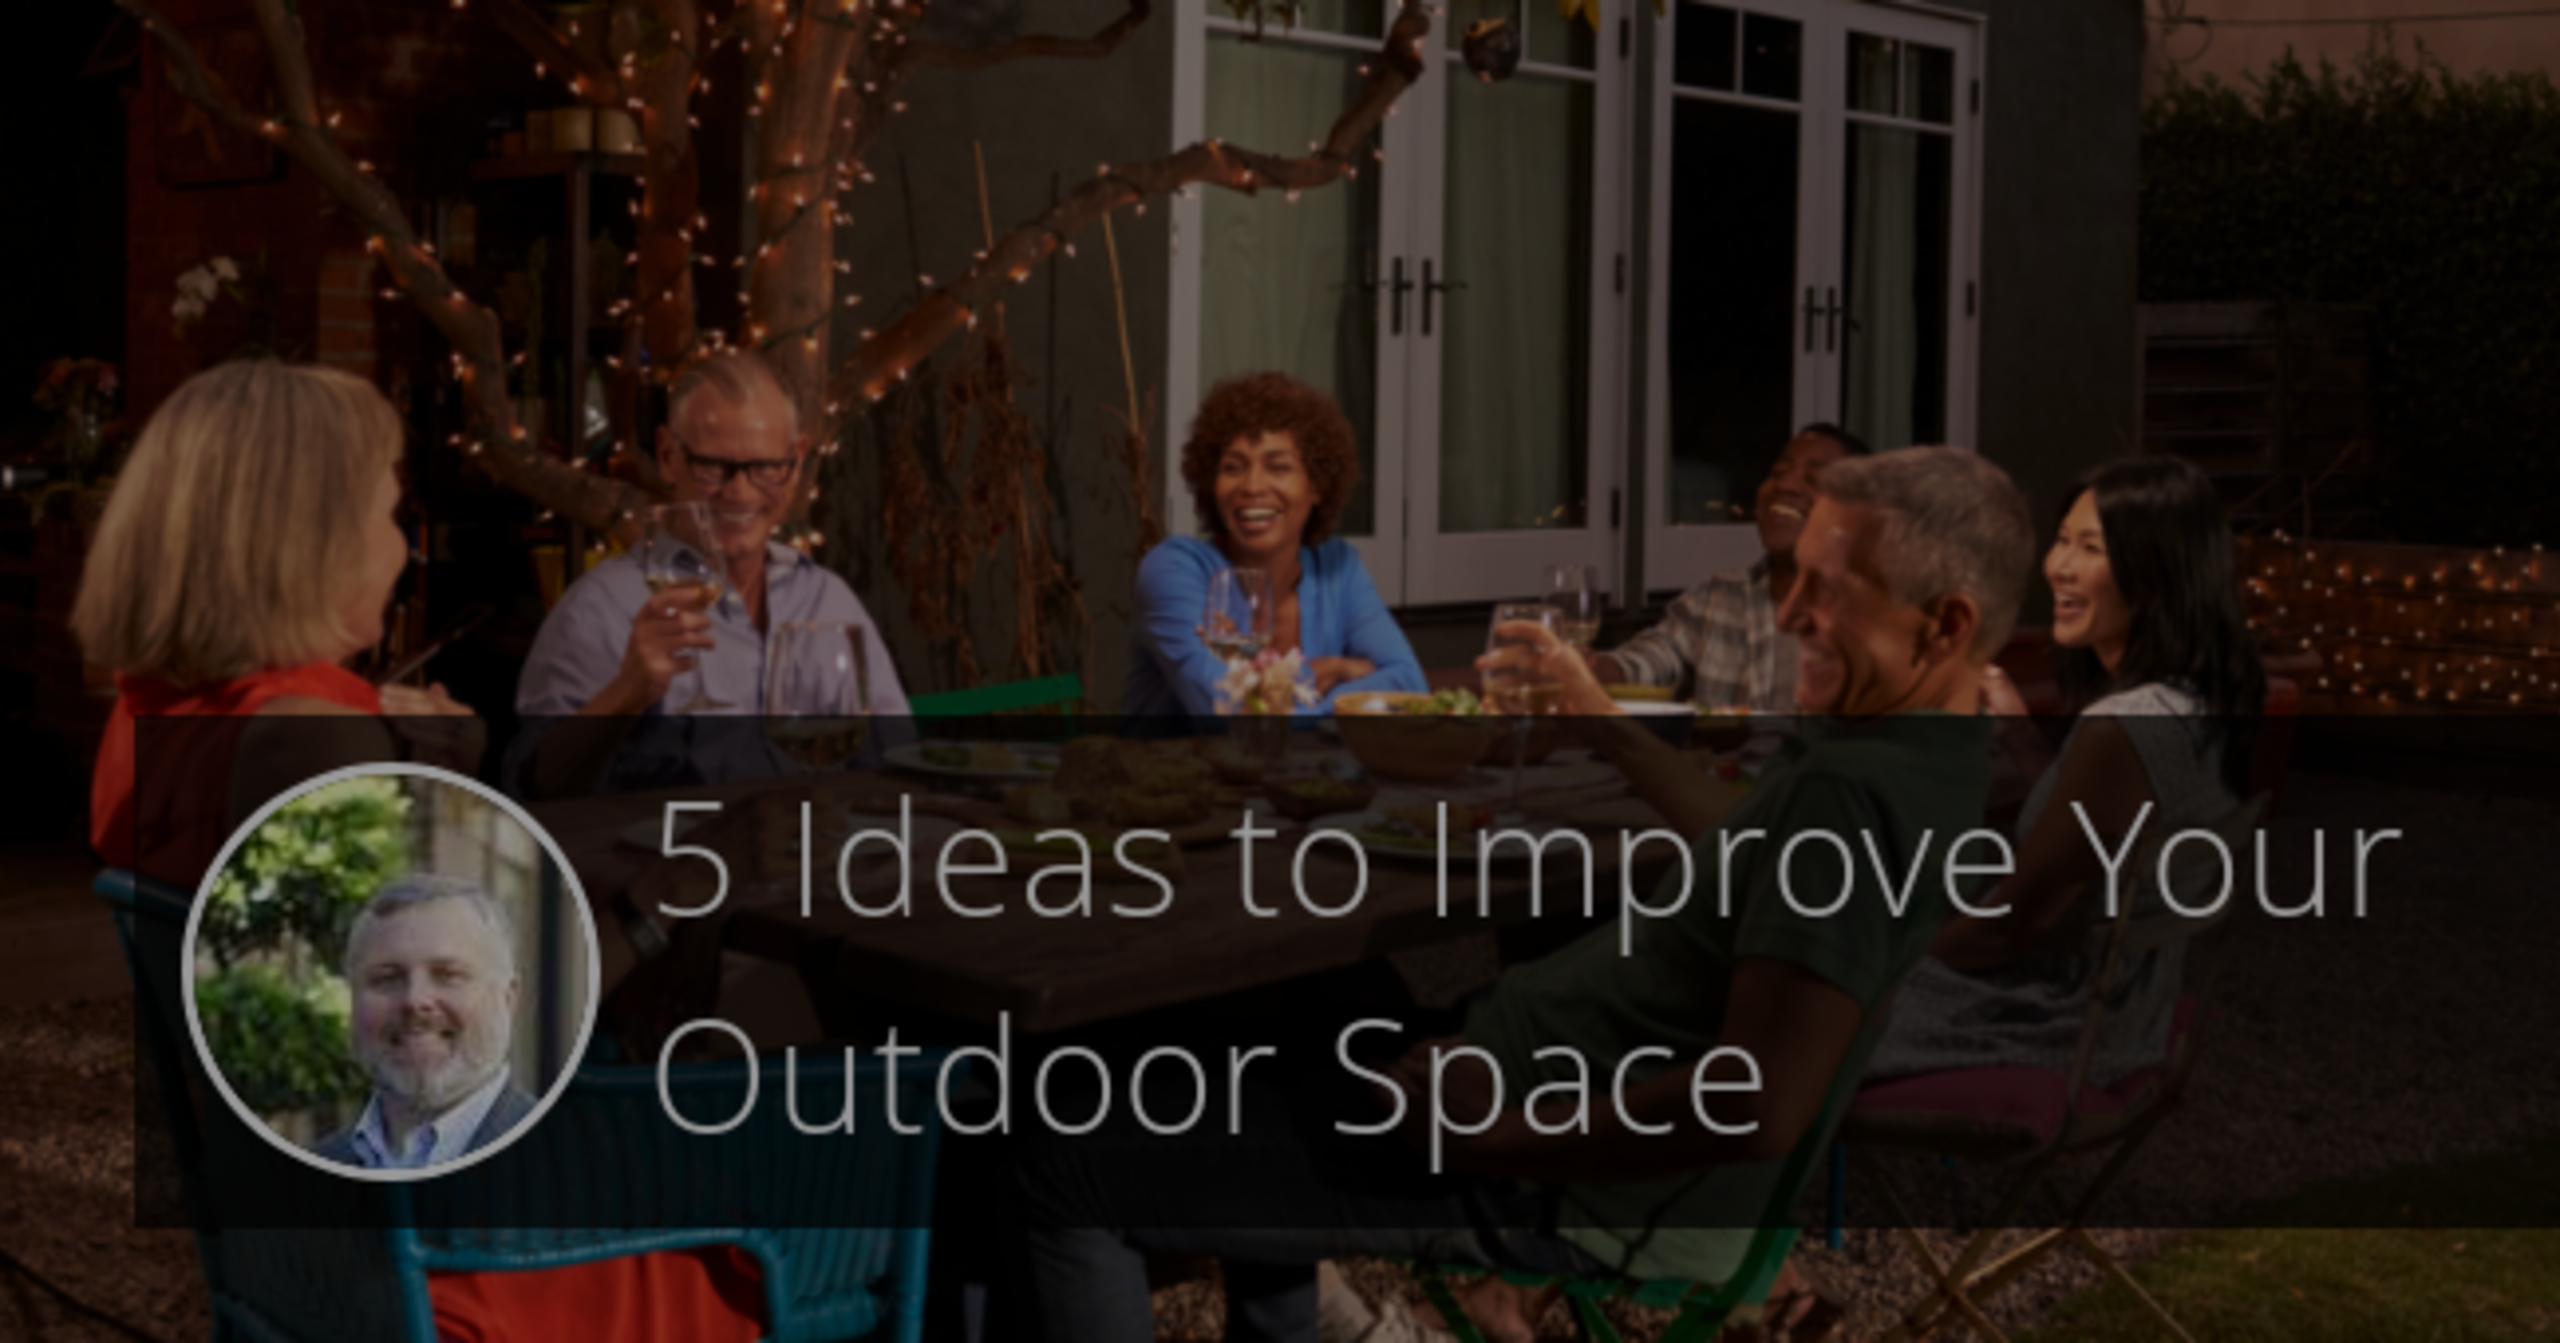 5 Ideas to Improve Your Outdoor Space